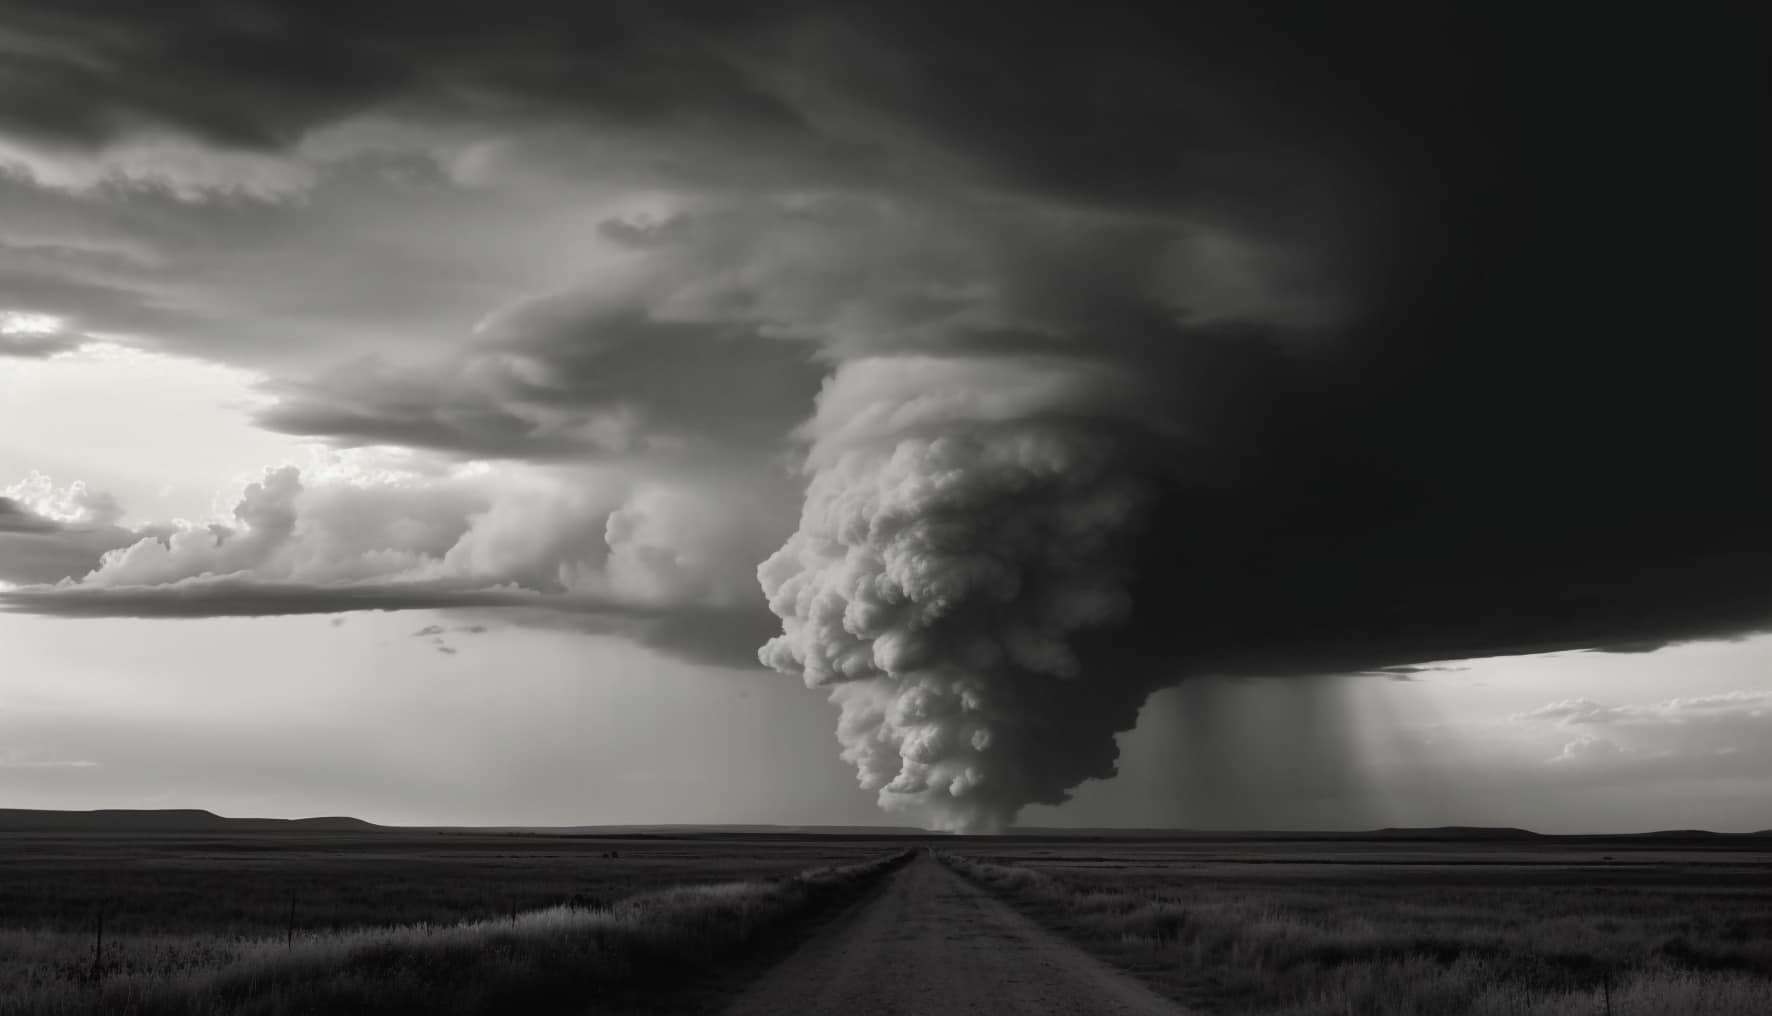 A monochrome image capturing a tornado swirling in the sky.